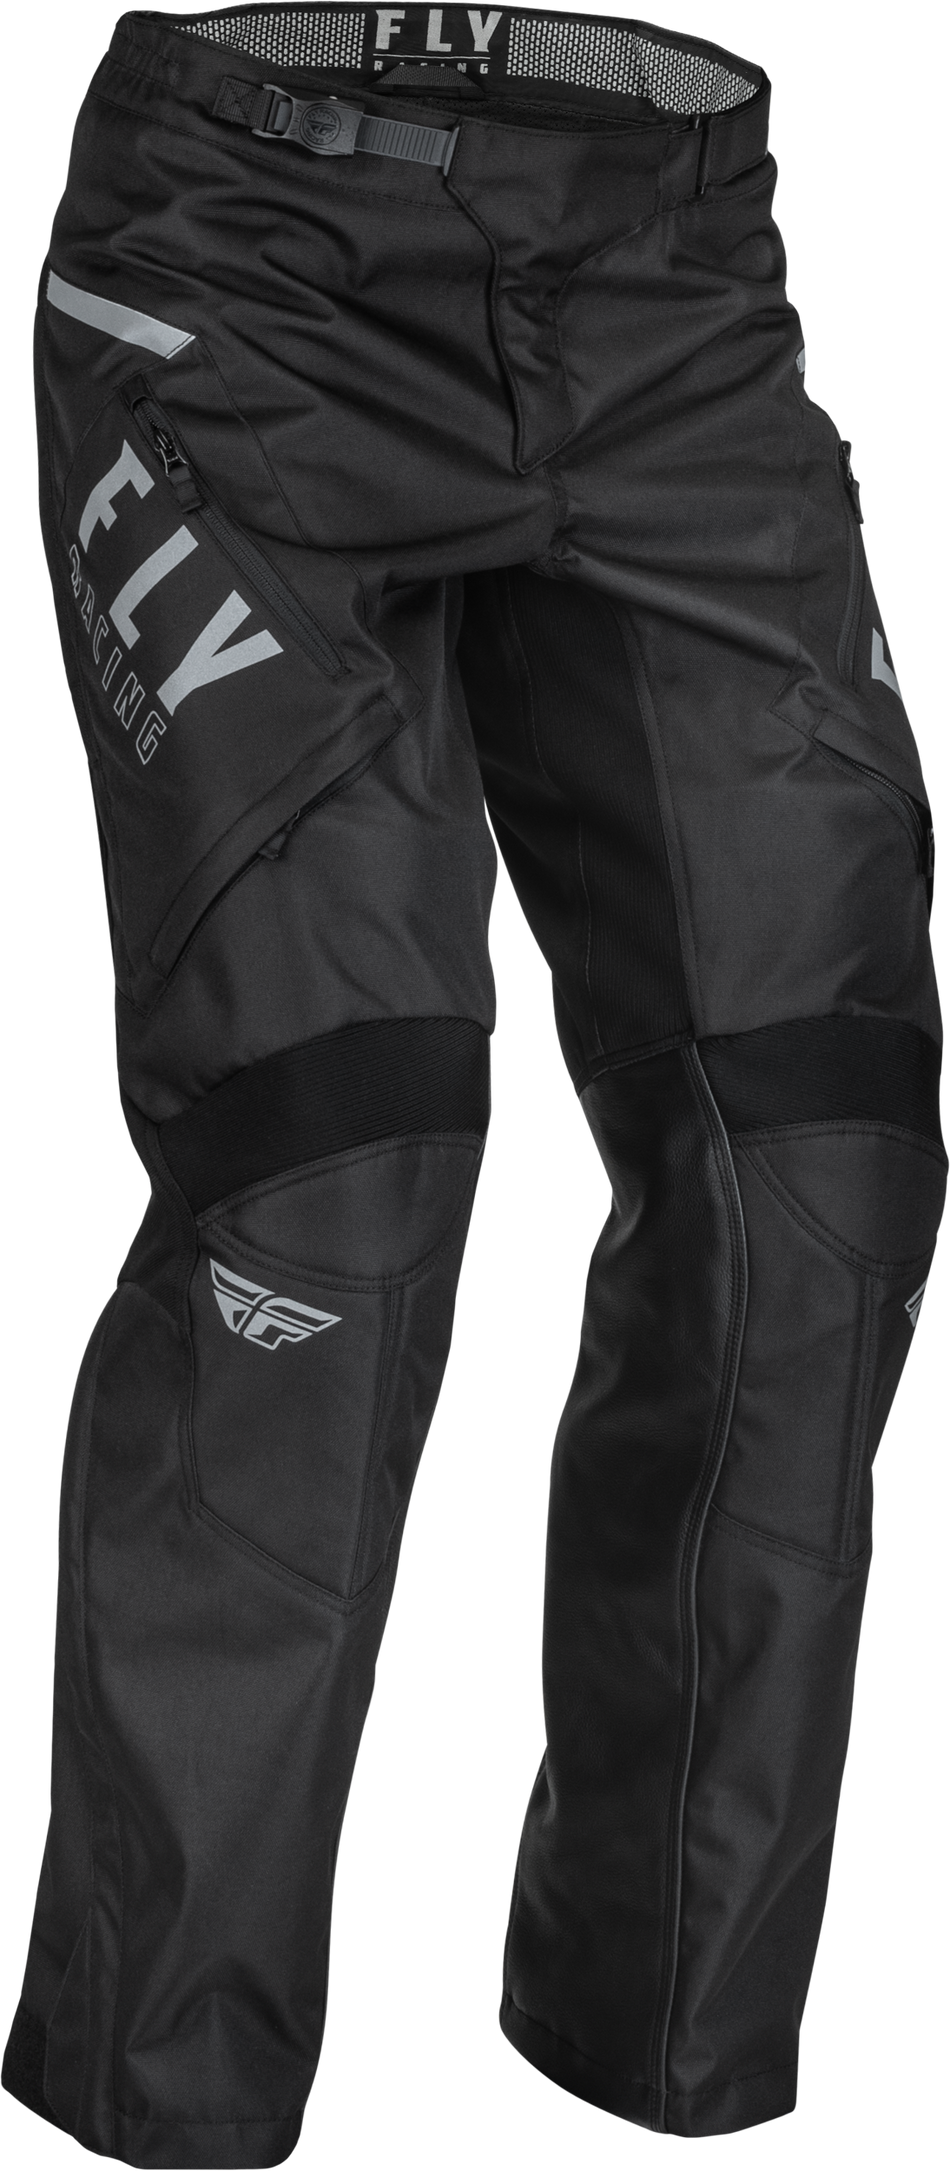 FLY RACING Patrol Over-Boot Pants Black/White Sz 48 376-64048